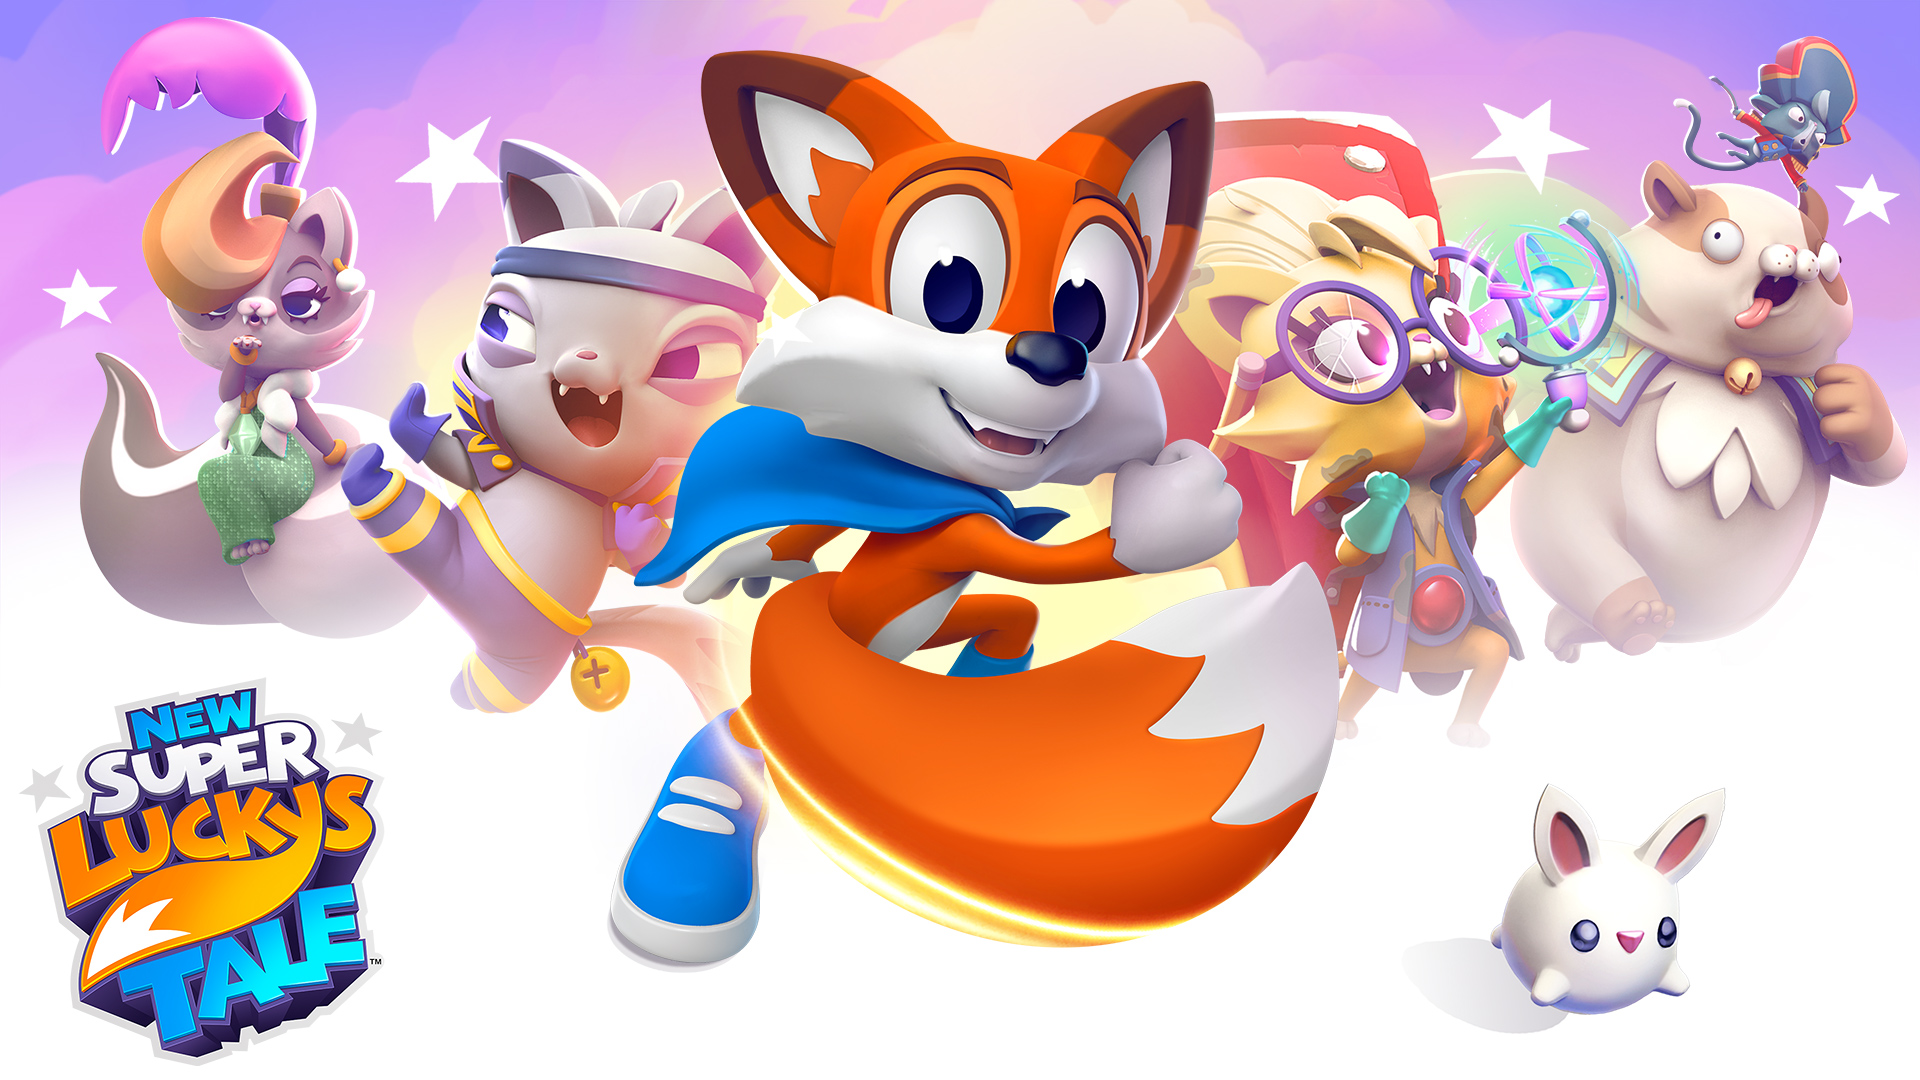 New Super Lucky’s Tale hits Xbox One and PS4